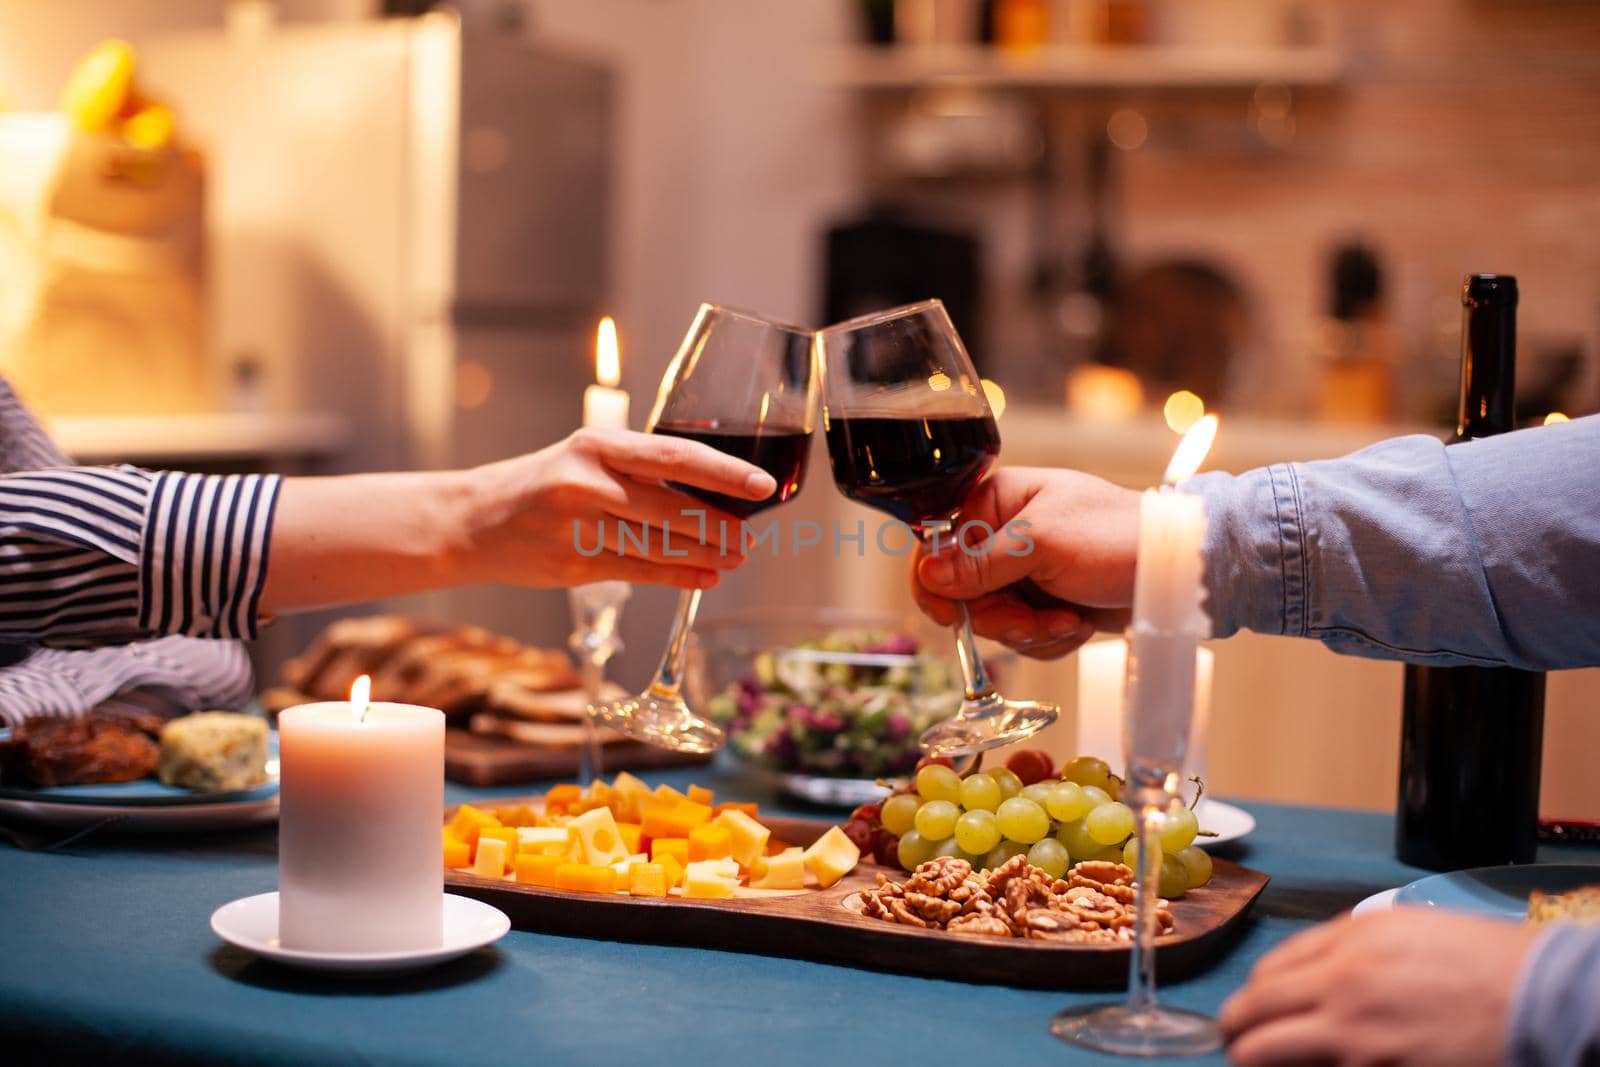 Close up of clinking glasses with wine during romantic dinner dinner celebrating relationship. Happy cheerful young couple dining together in the cozy kitchen, enjoying the meal, celebrating anniversary romantic toast